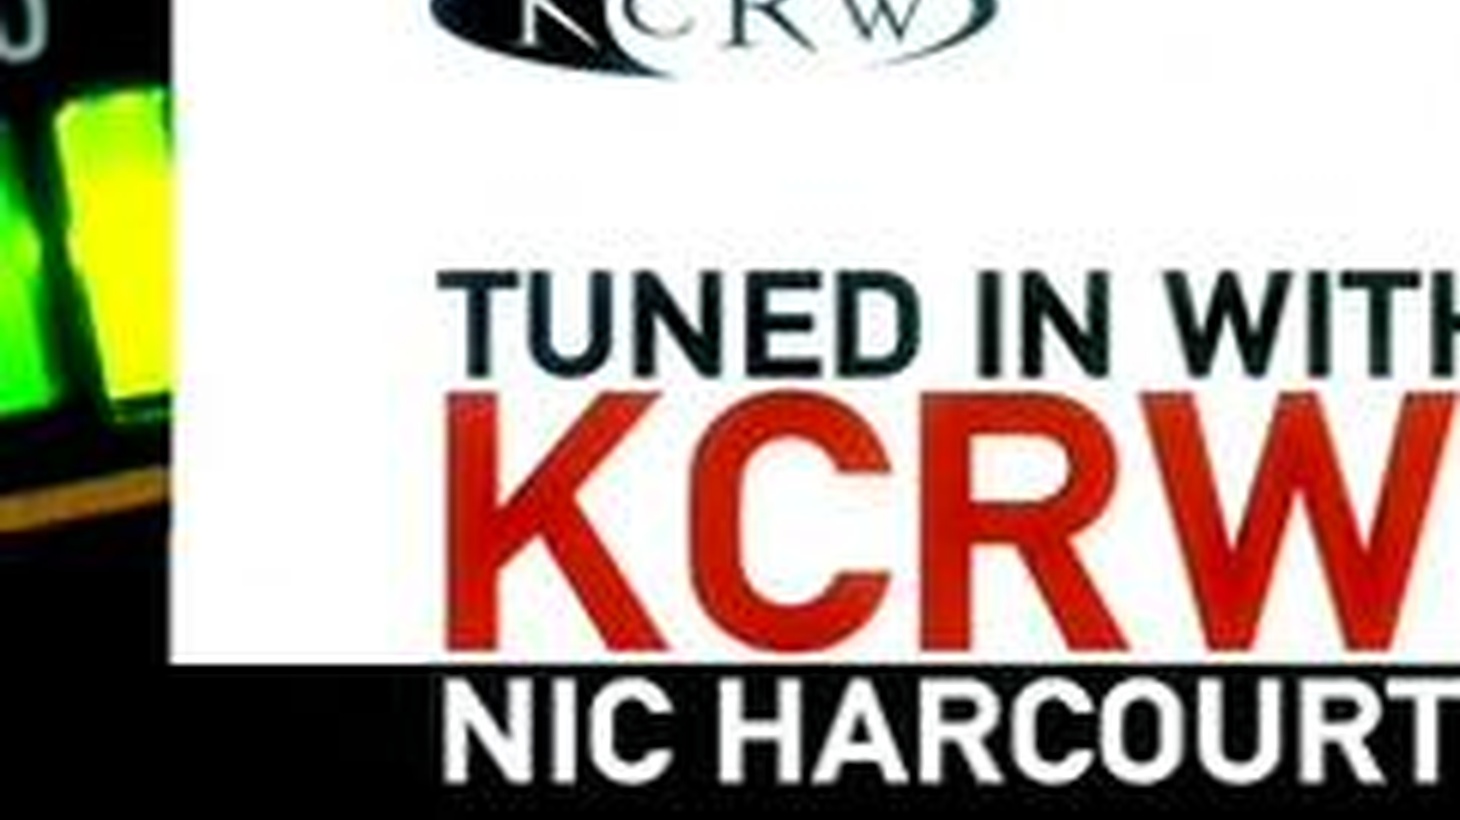 This week, KCRW’s Morning Becomes Eclectic host Nic Harcourt introduces a new batch of hot music. Enjoy tracks from new albums by Benji Hughes (A Love Extreme), The Faint (Fasciinatiion), and Leila (Blood Looms and Blooms), as well as...